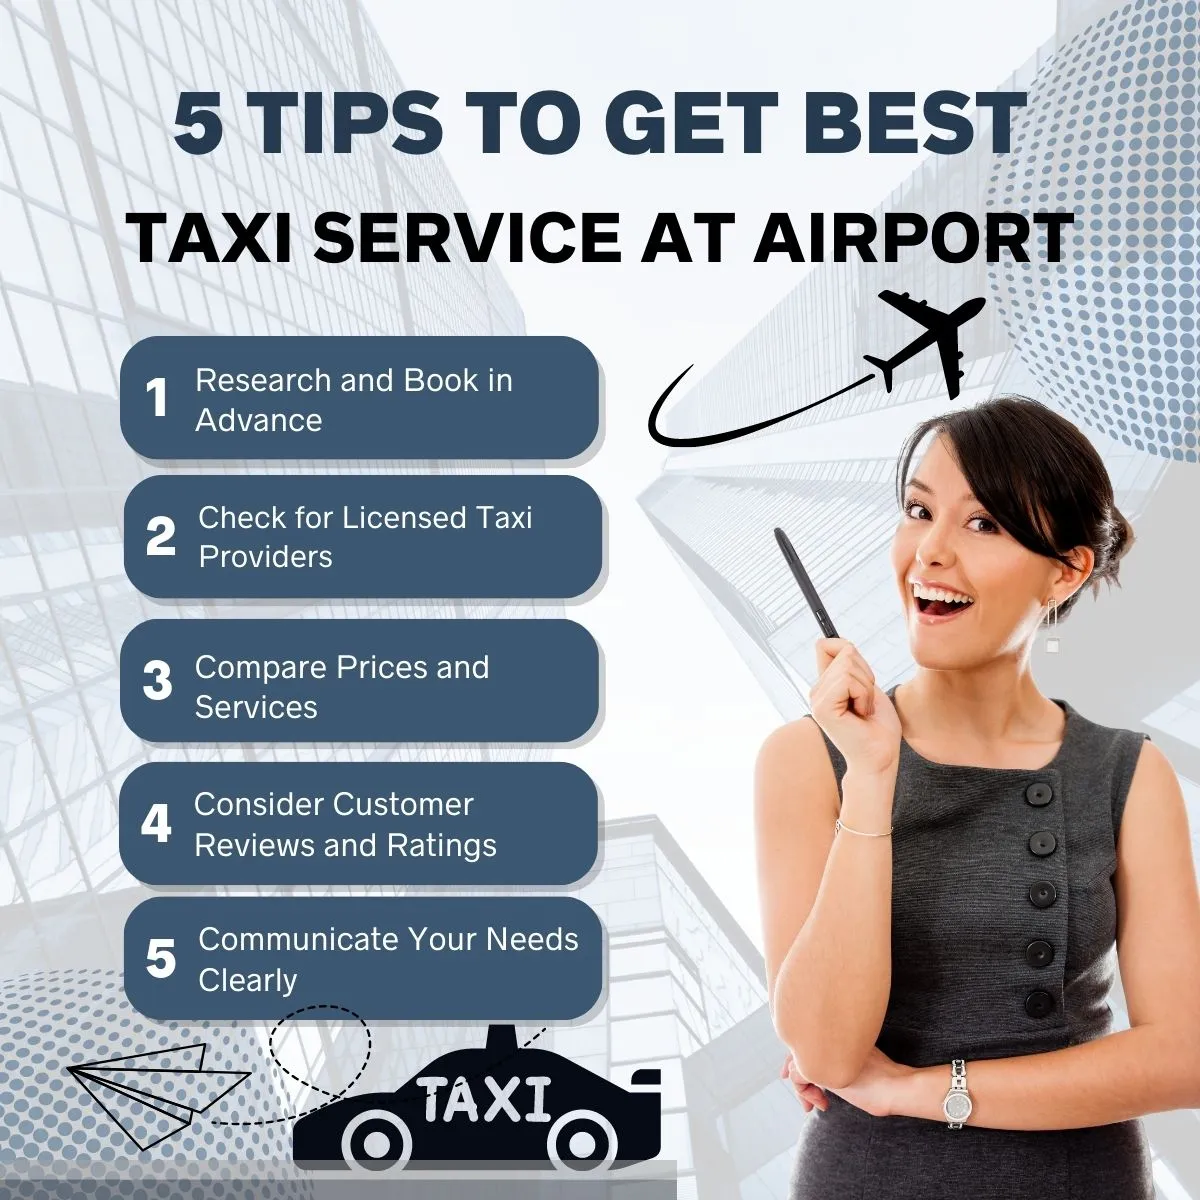 5 Tips to get best Airport taxi service